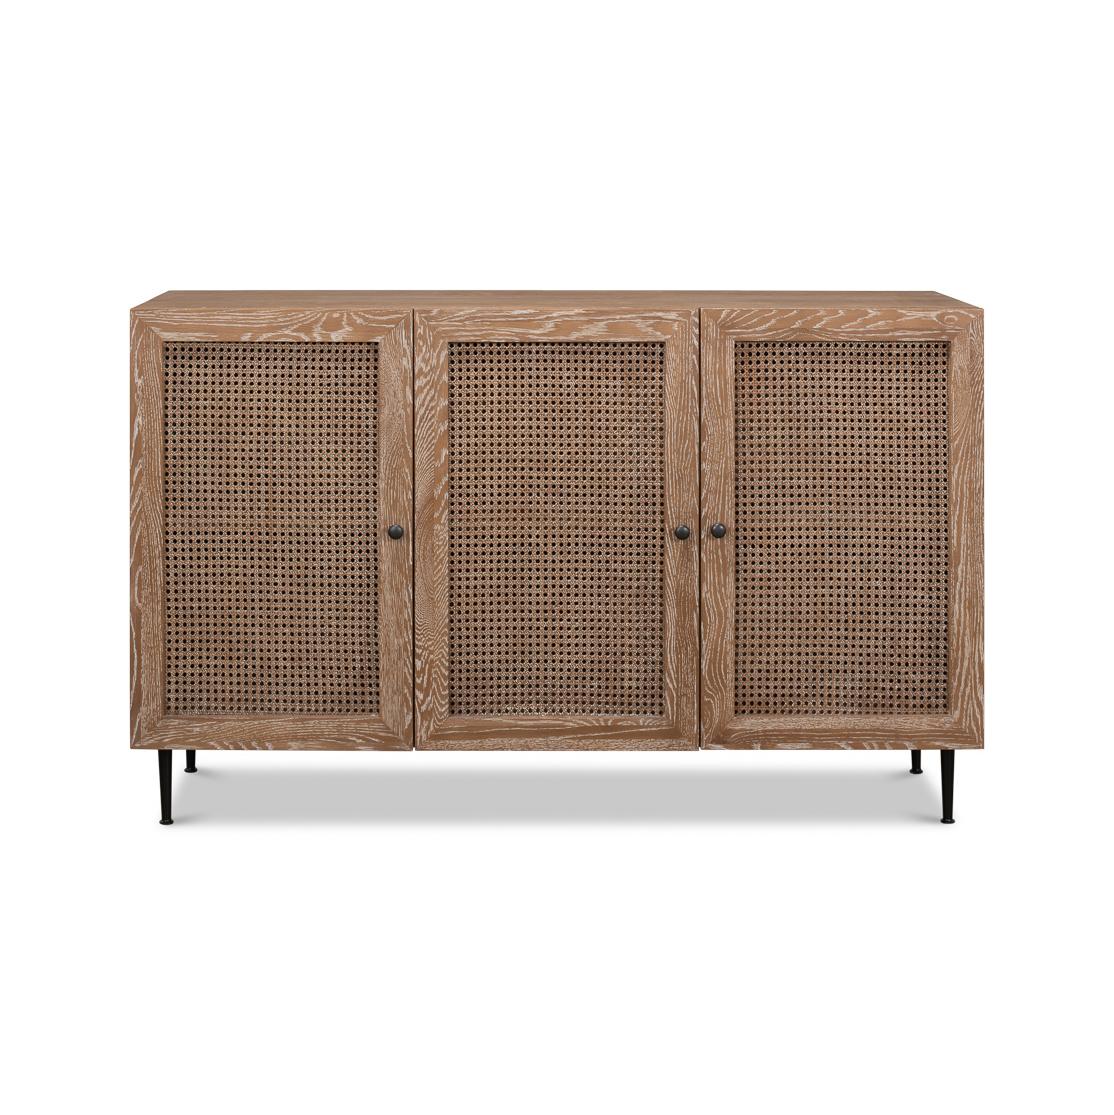 This beautifully crafted buffet sideboard exudes an air of understated elegance with its natural wood grain whitewash oak finish and woven cane detail panel door. Supported by slender yet sturdy black metal legs, it offers a modern twist on a